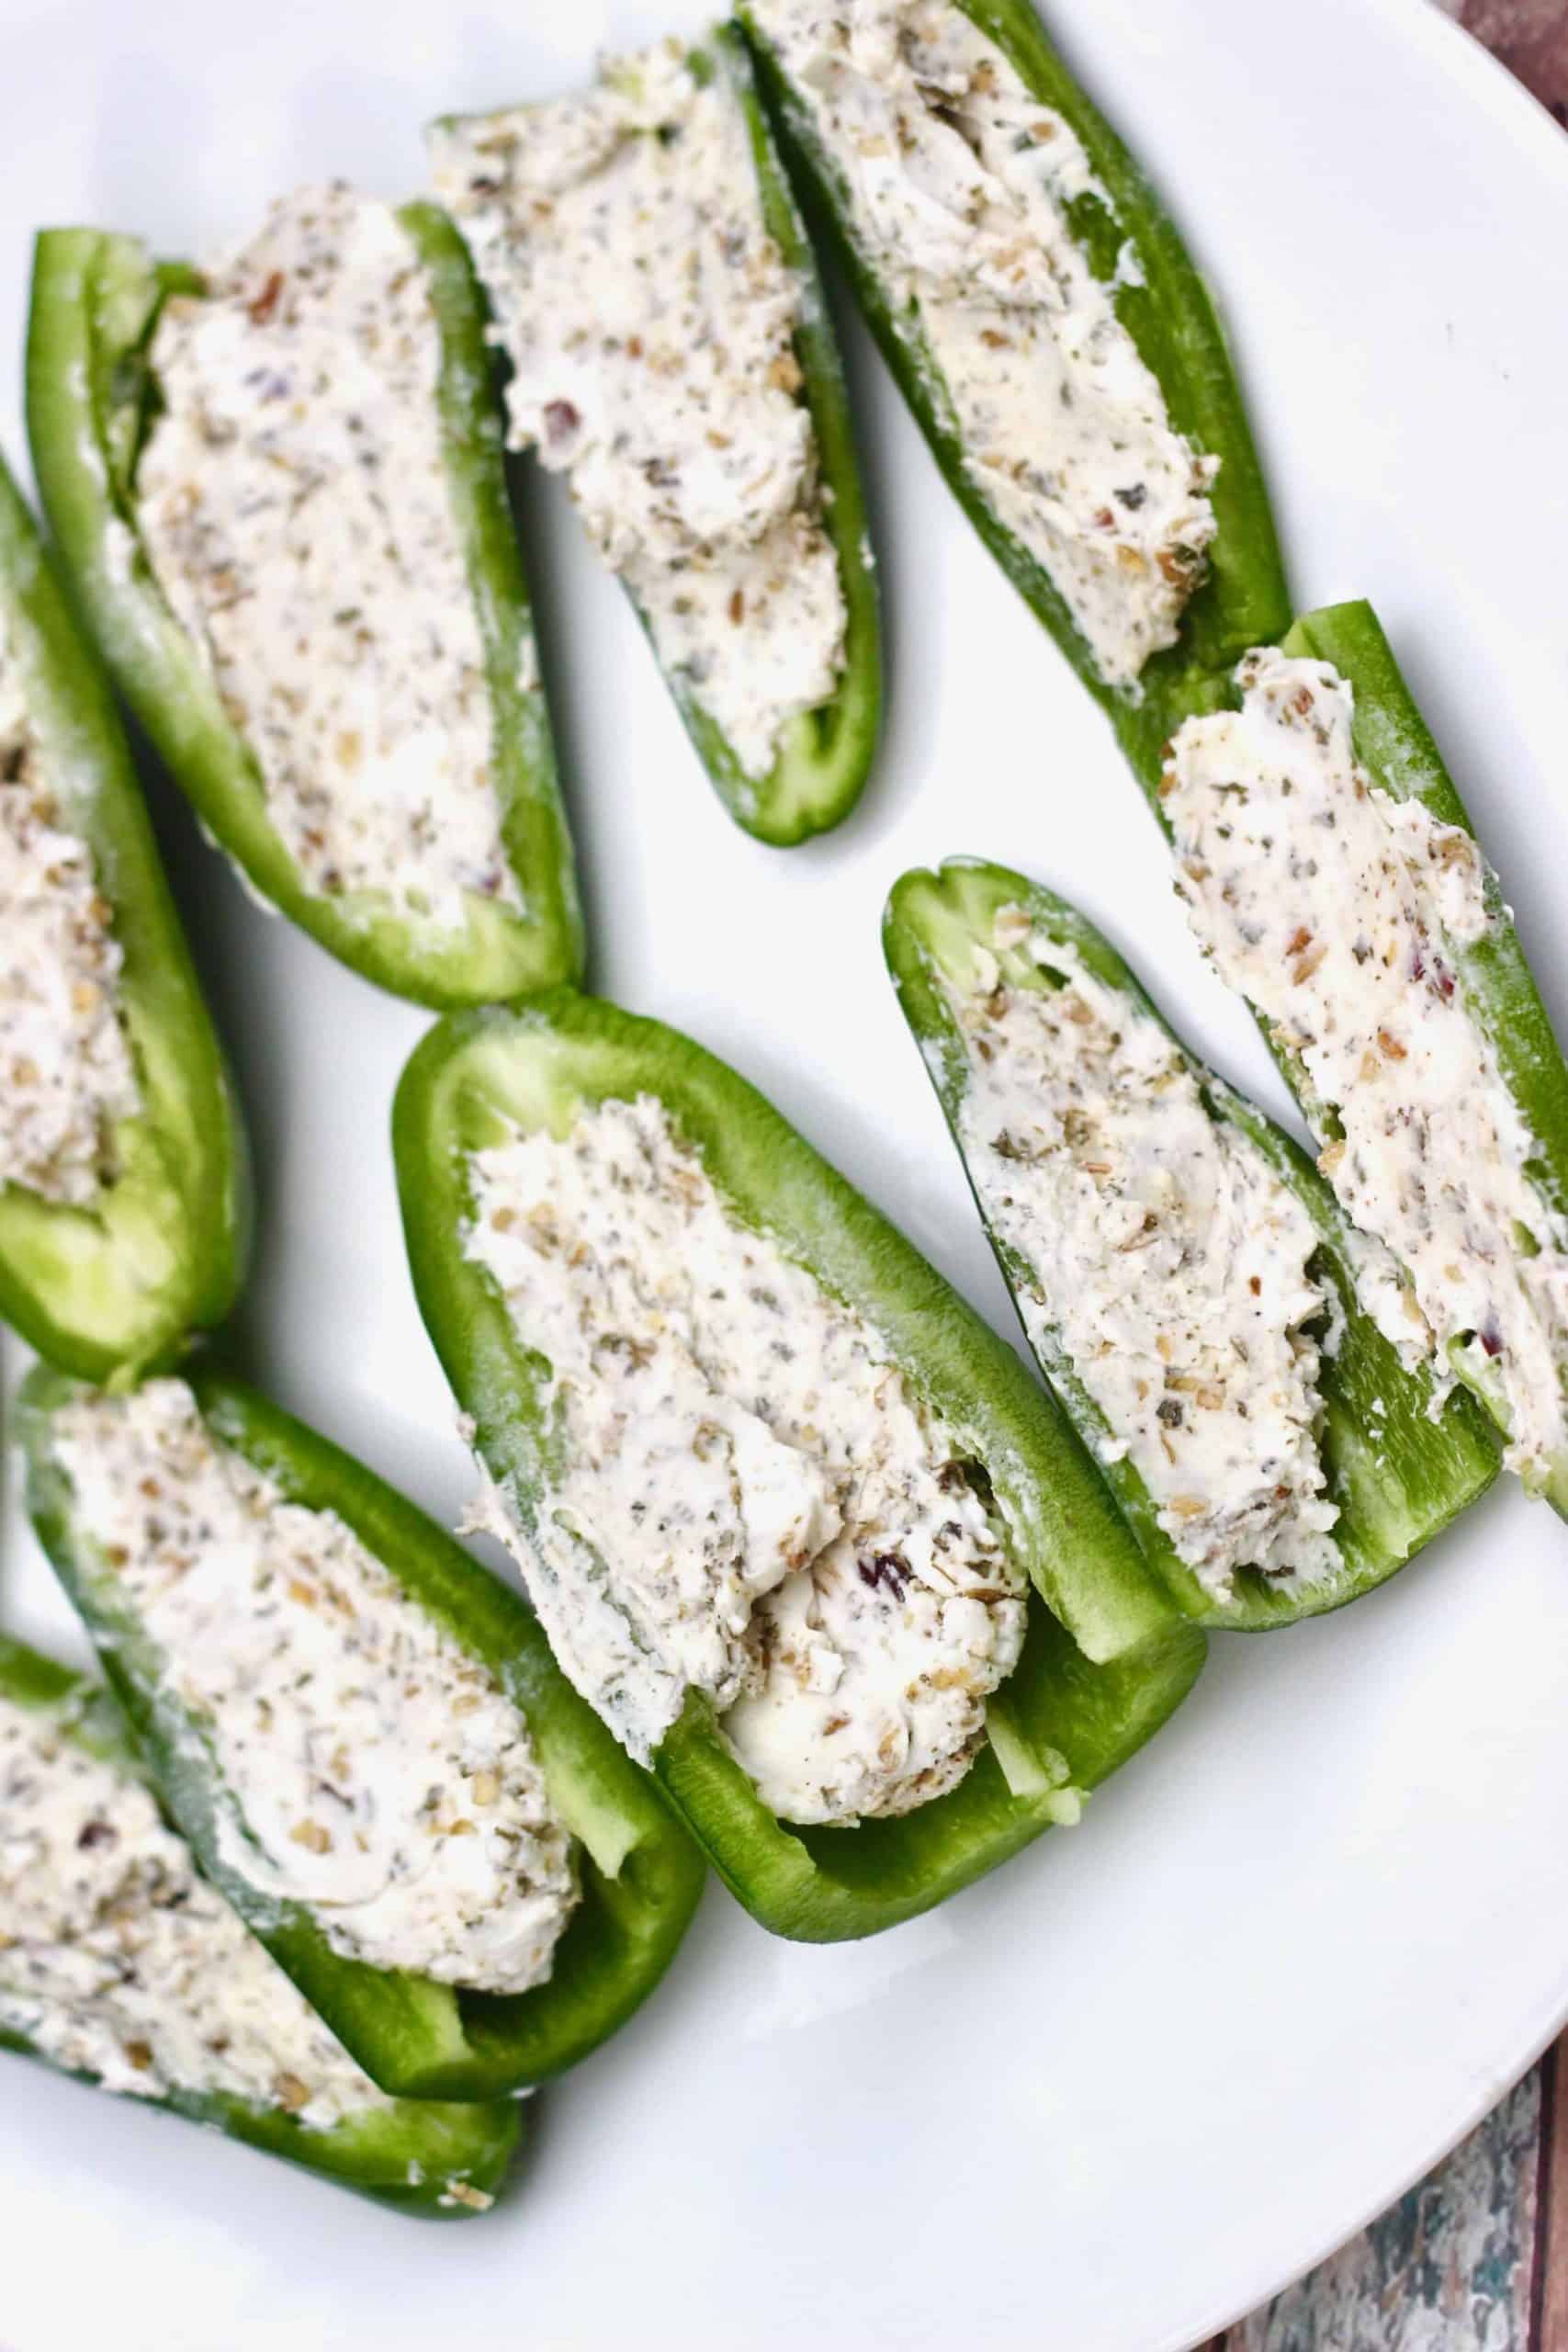 jalapeno pepper halves stuffed with goat cheese blend